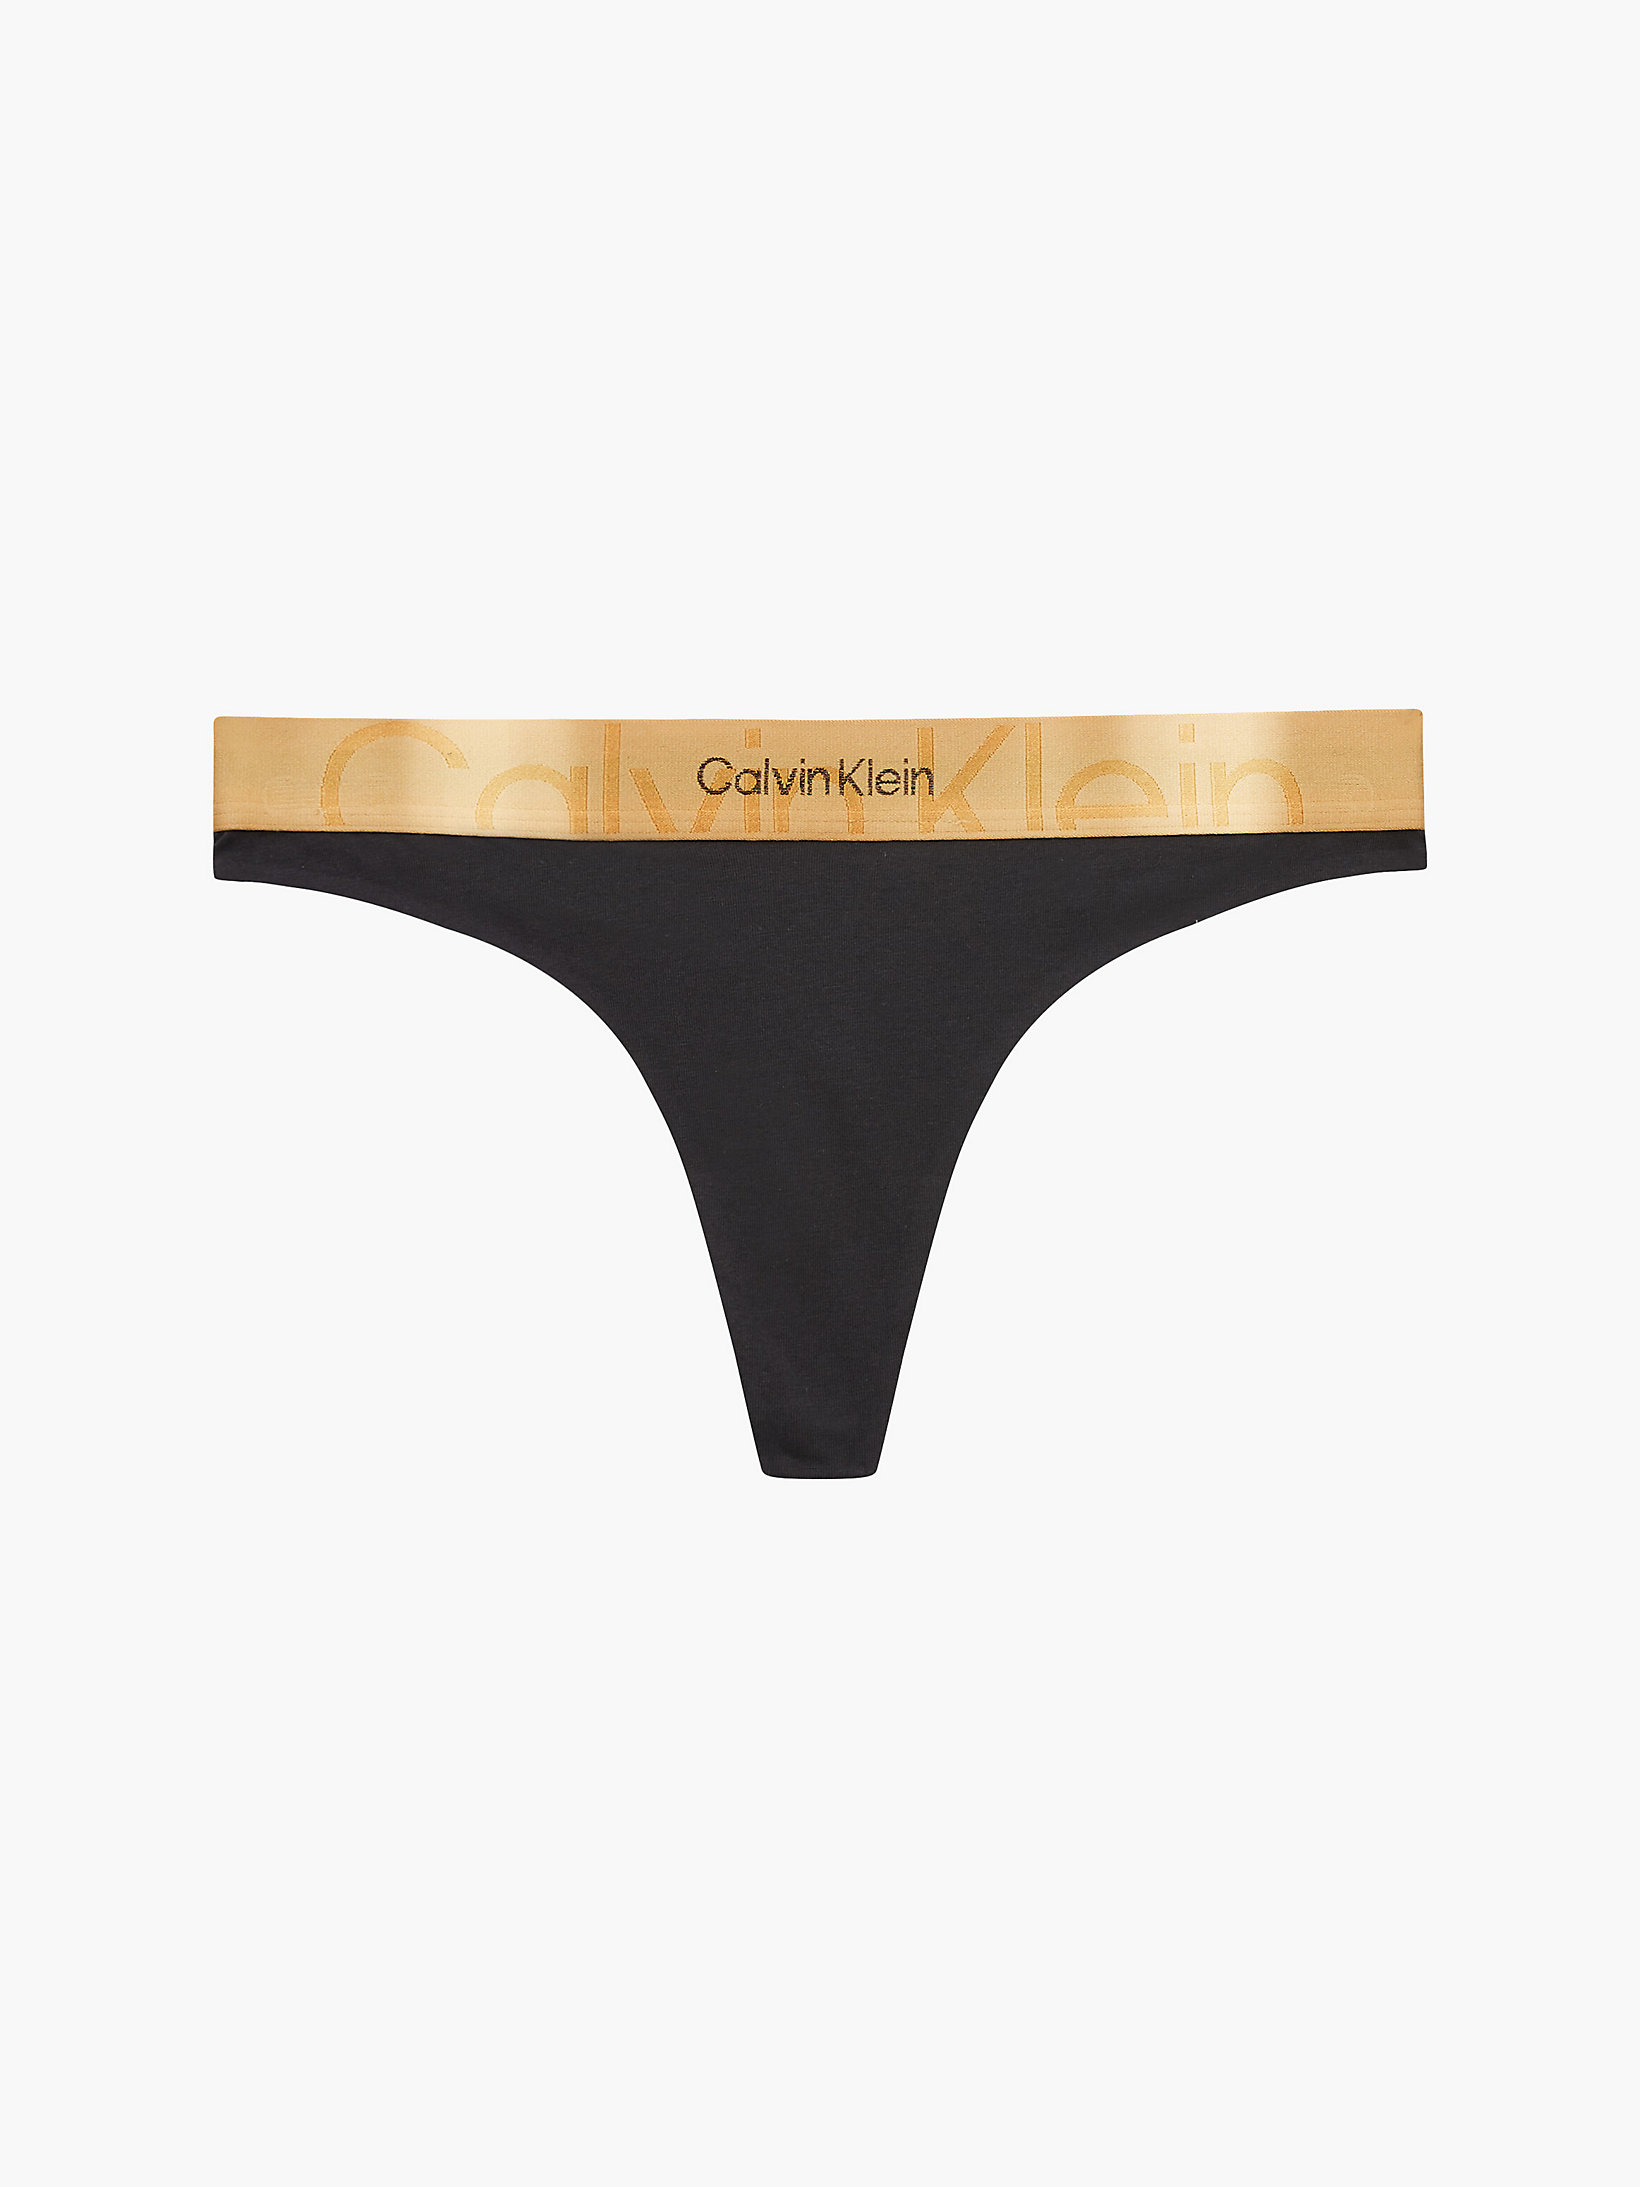 Perizoma - Embossed Icon > Black W. Old Gold Wsb > undefined donna > Calvin Klein